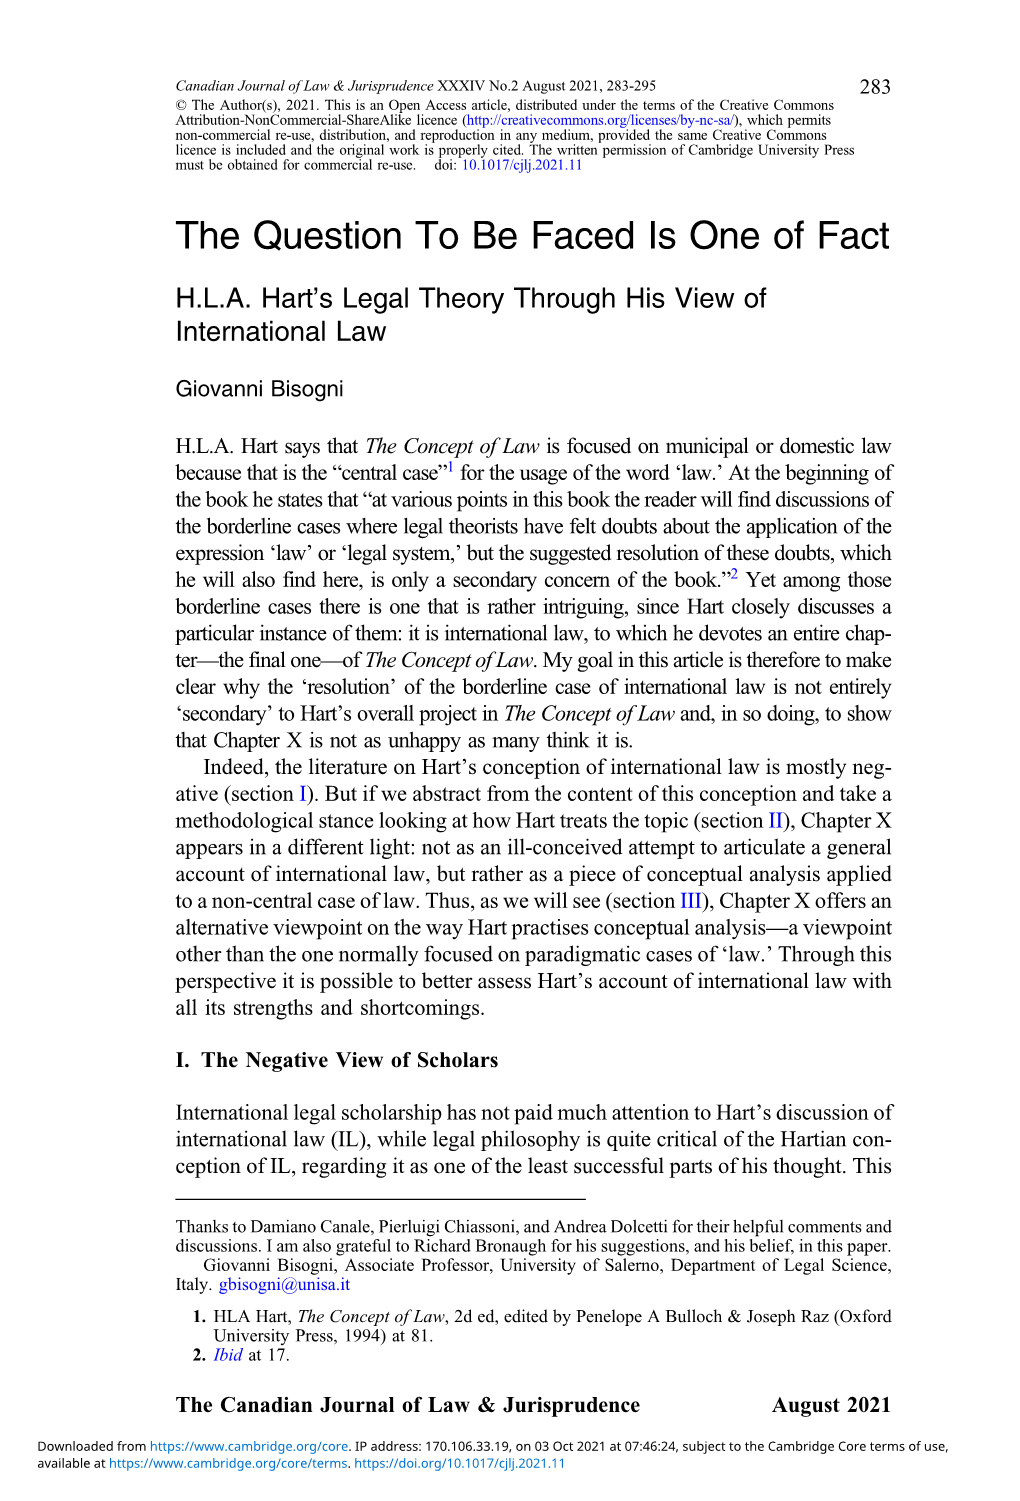 The Question to Be Faced Is One of Fact: H.L.A. Hart's Legal Theory